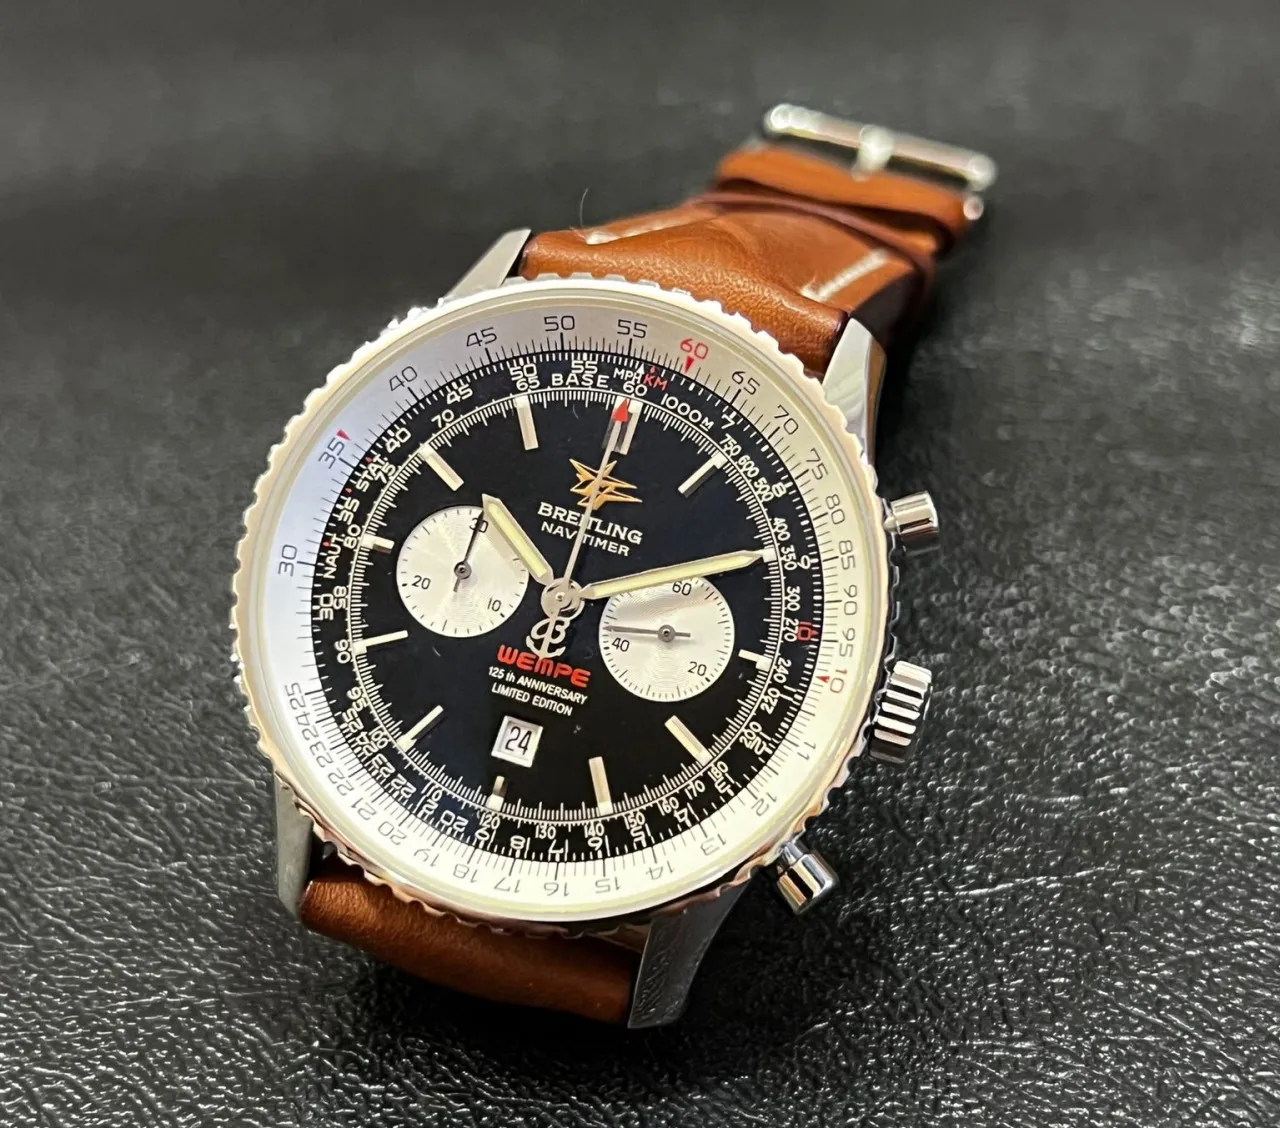 Breitling Navitimer a41340 42mm Stainless steel